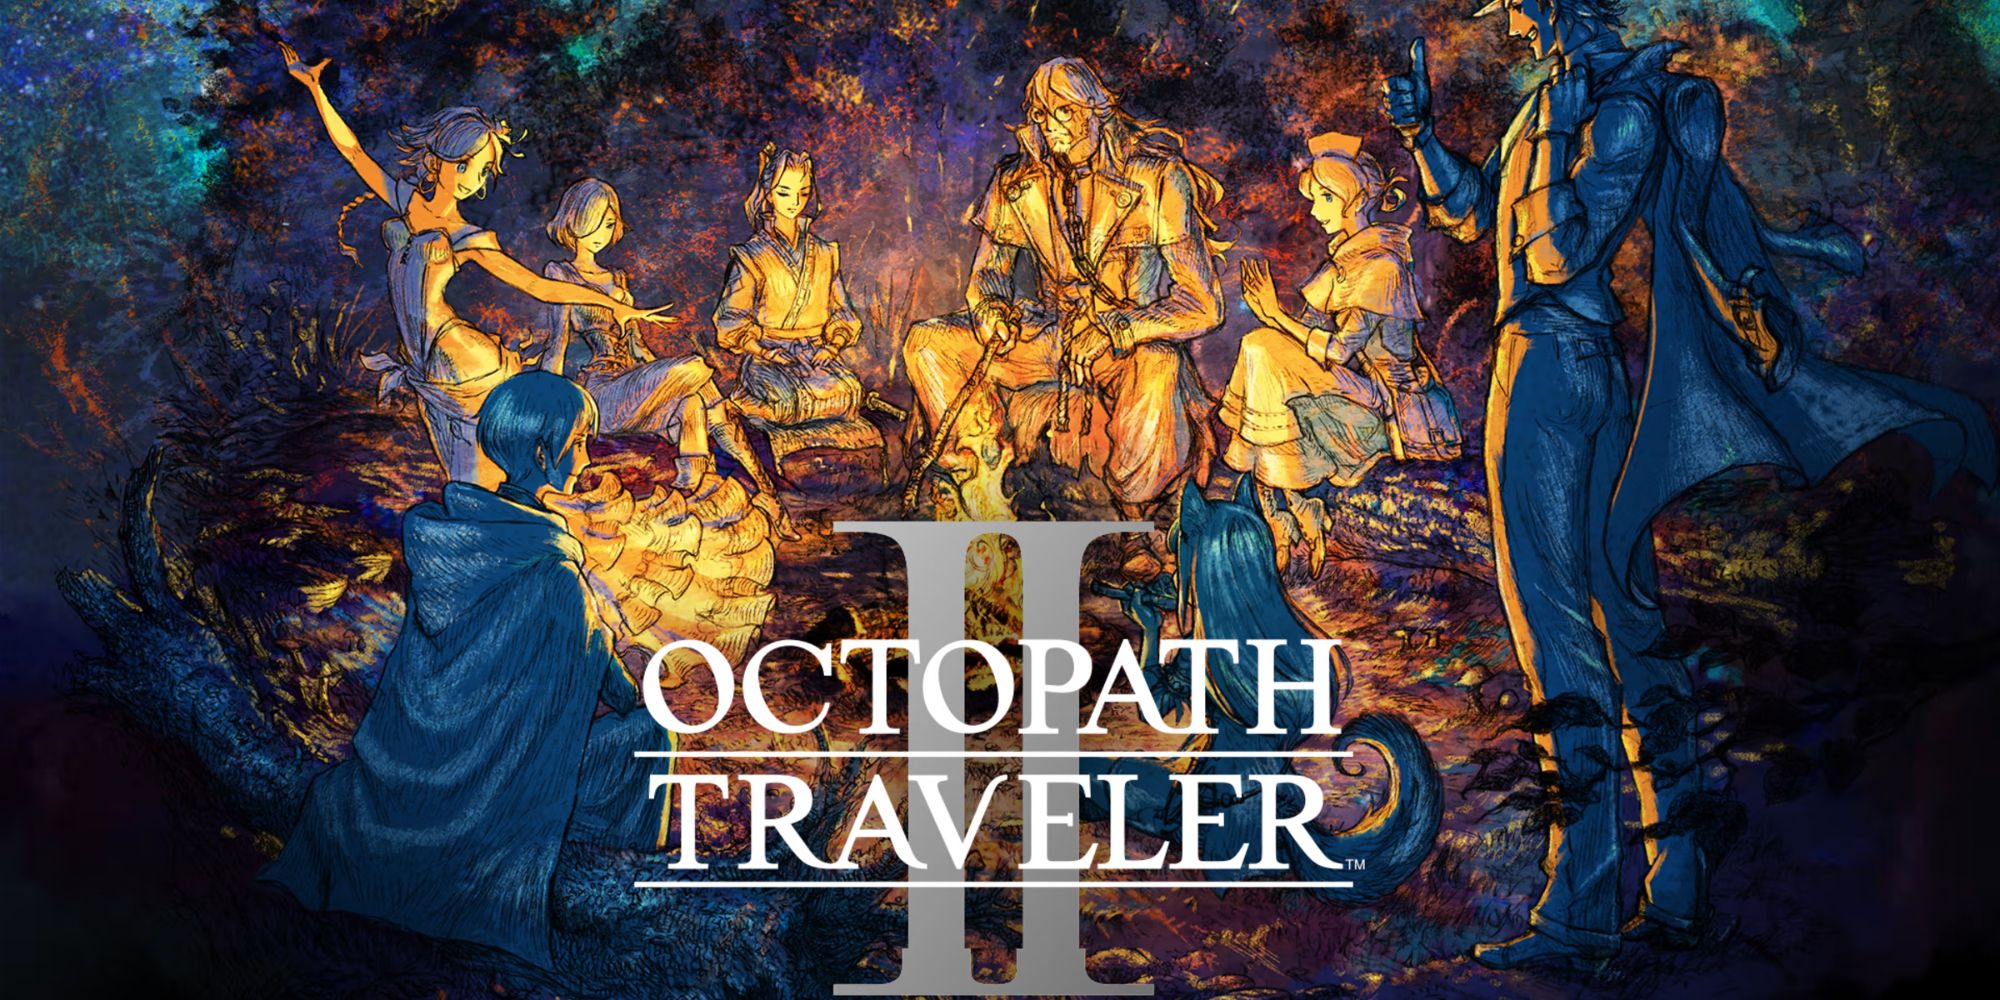 Key art for Octopath Traveler 2, showing the game's cast siting around a campfire.